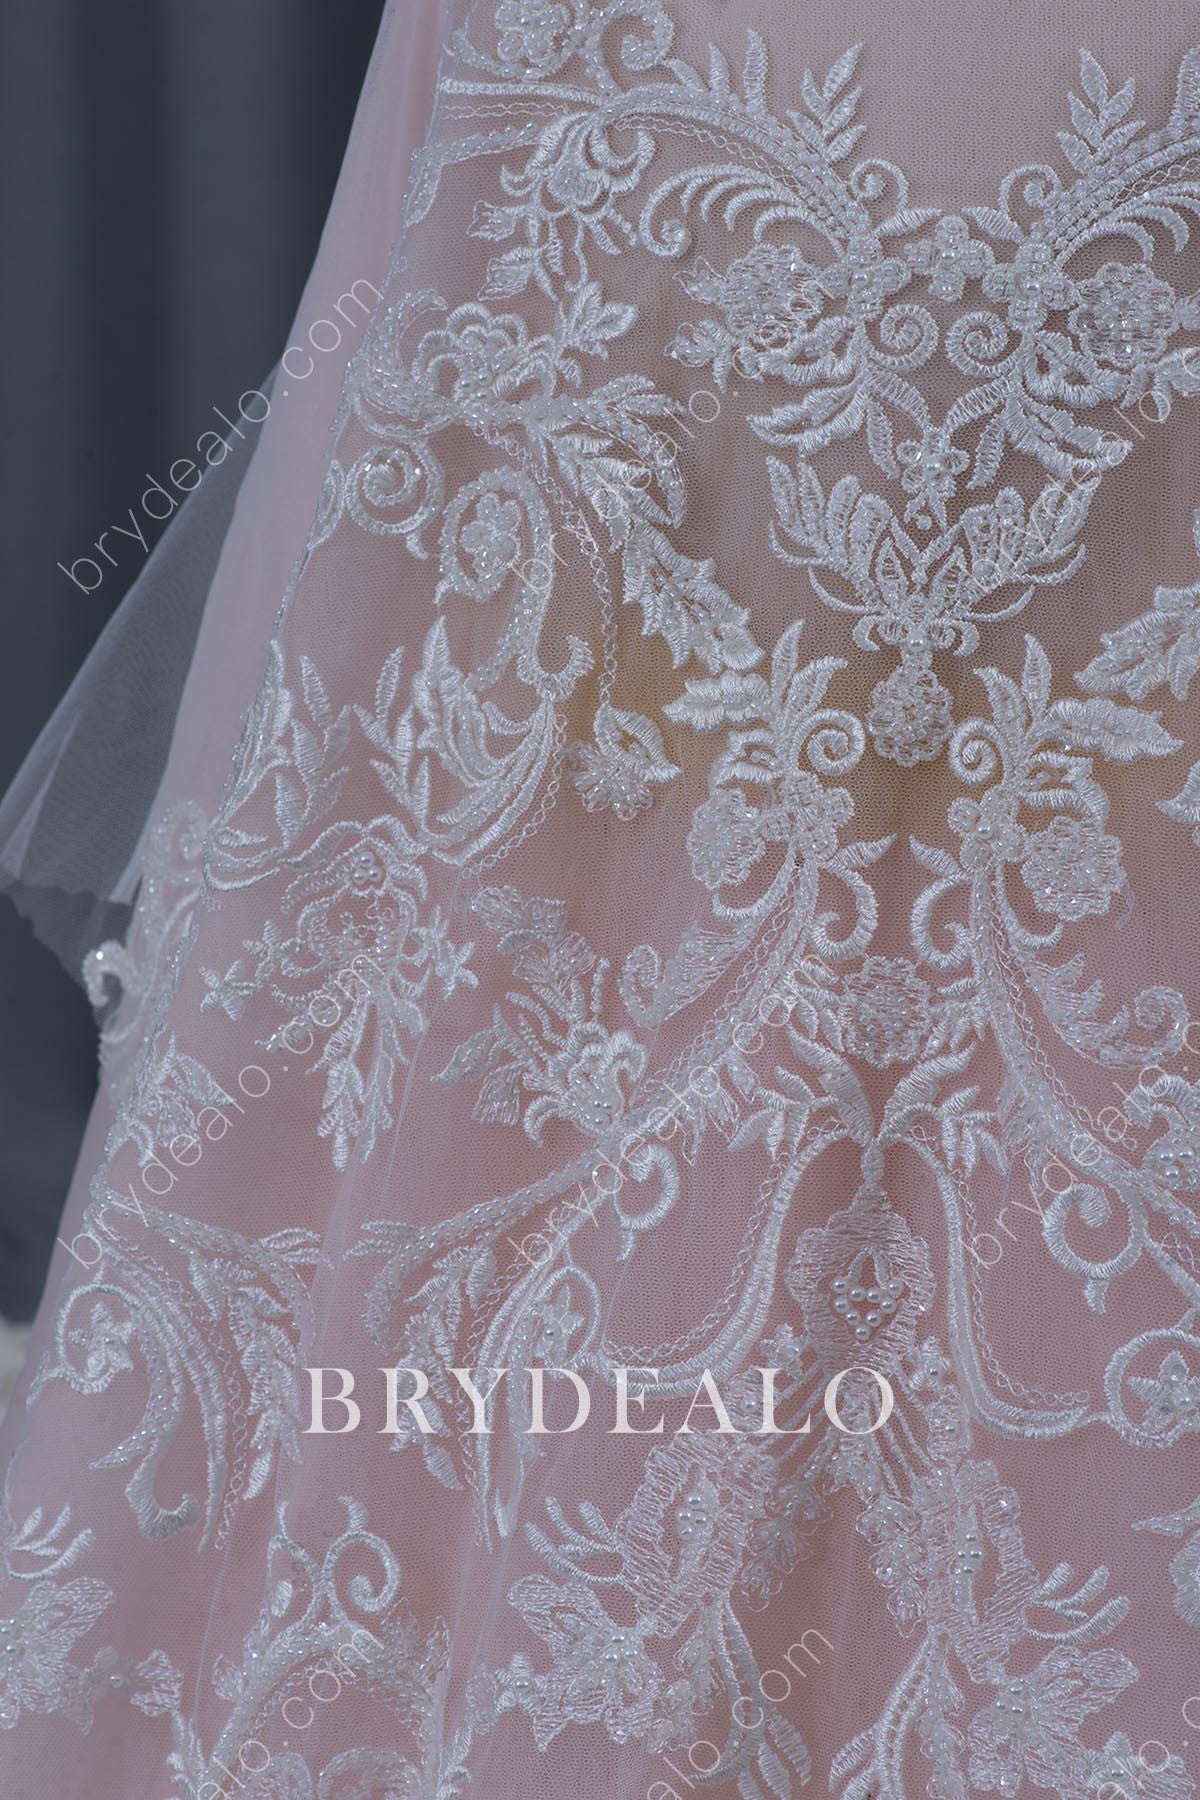 Best Pearls Beaded Cording Lace Fabric Online